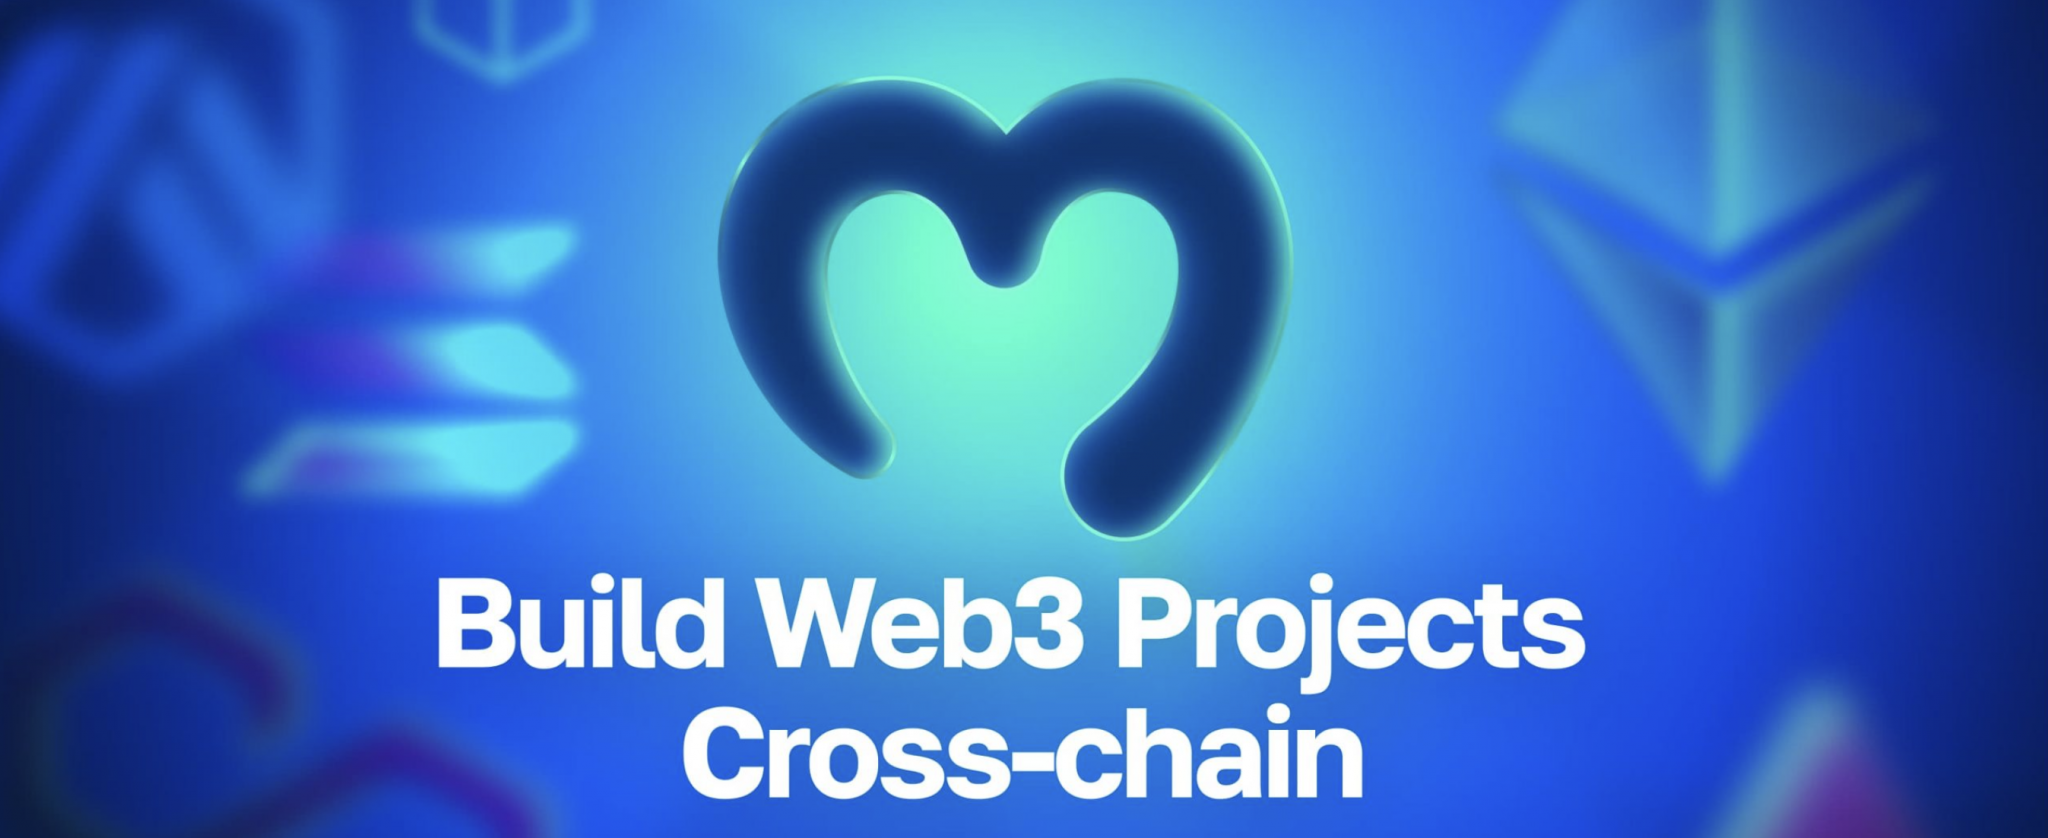 Moralis logo with "Build Web3 Projects Cross-chain" text.